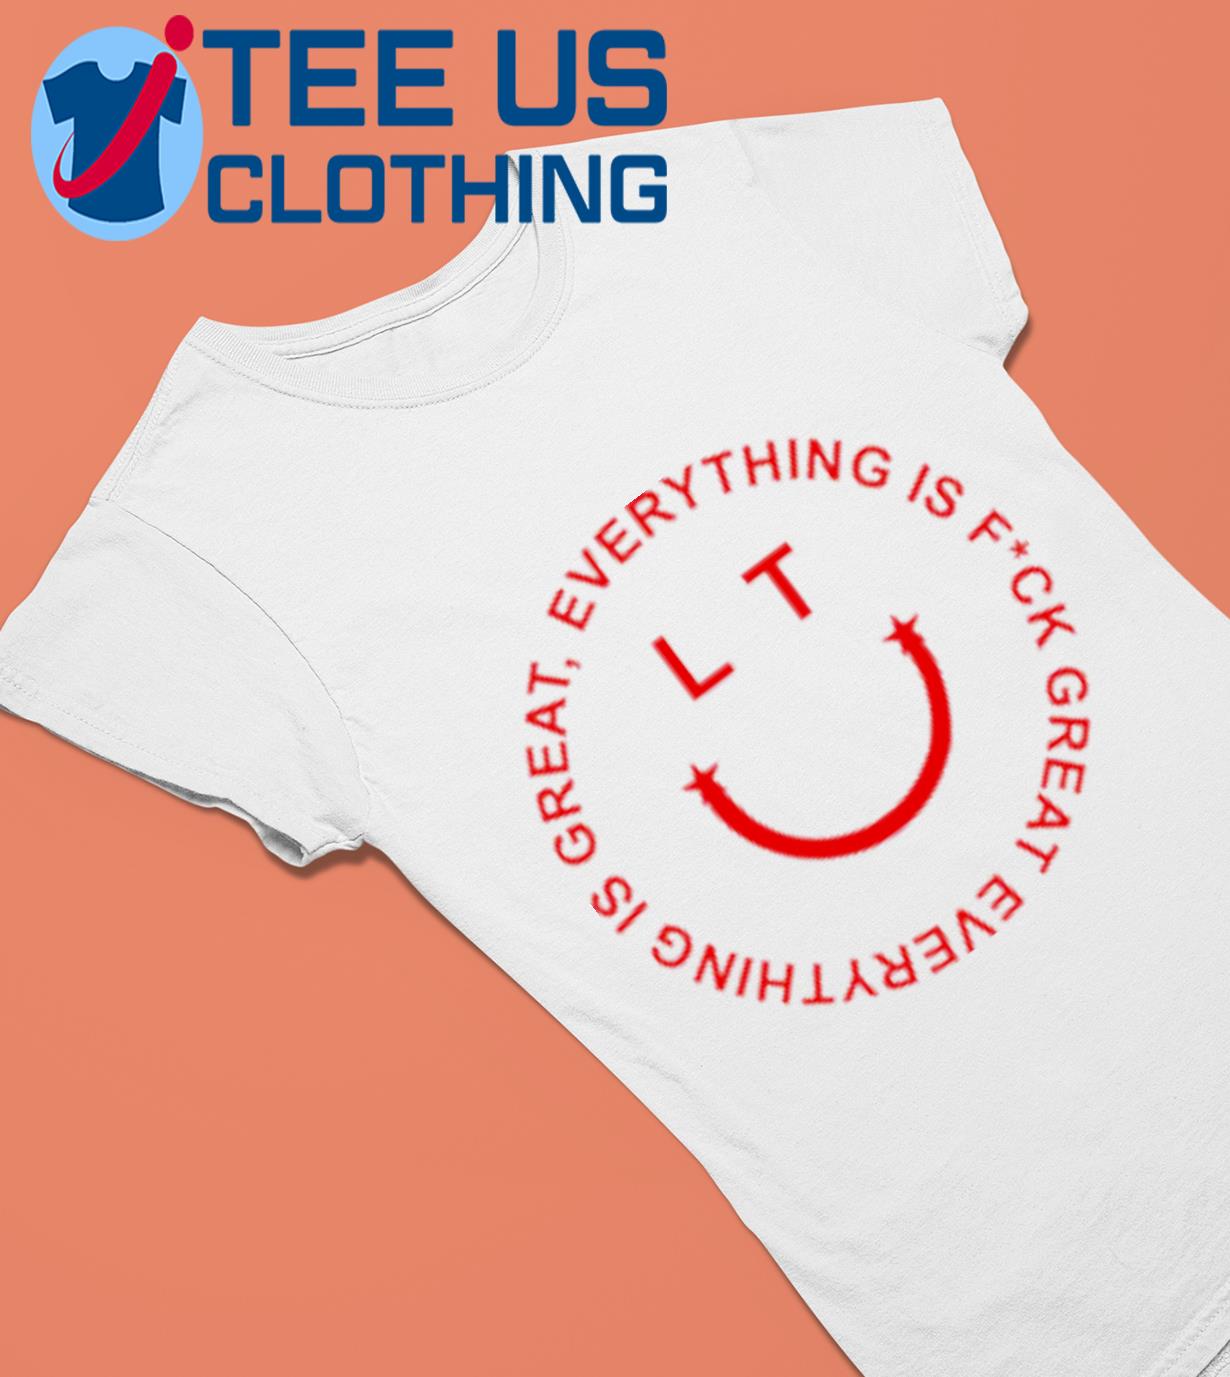 Louis Tomlinson Inspired; Everything Is Fooking Great Women's T-Shirt